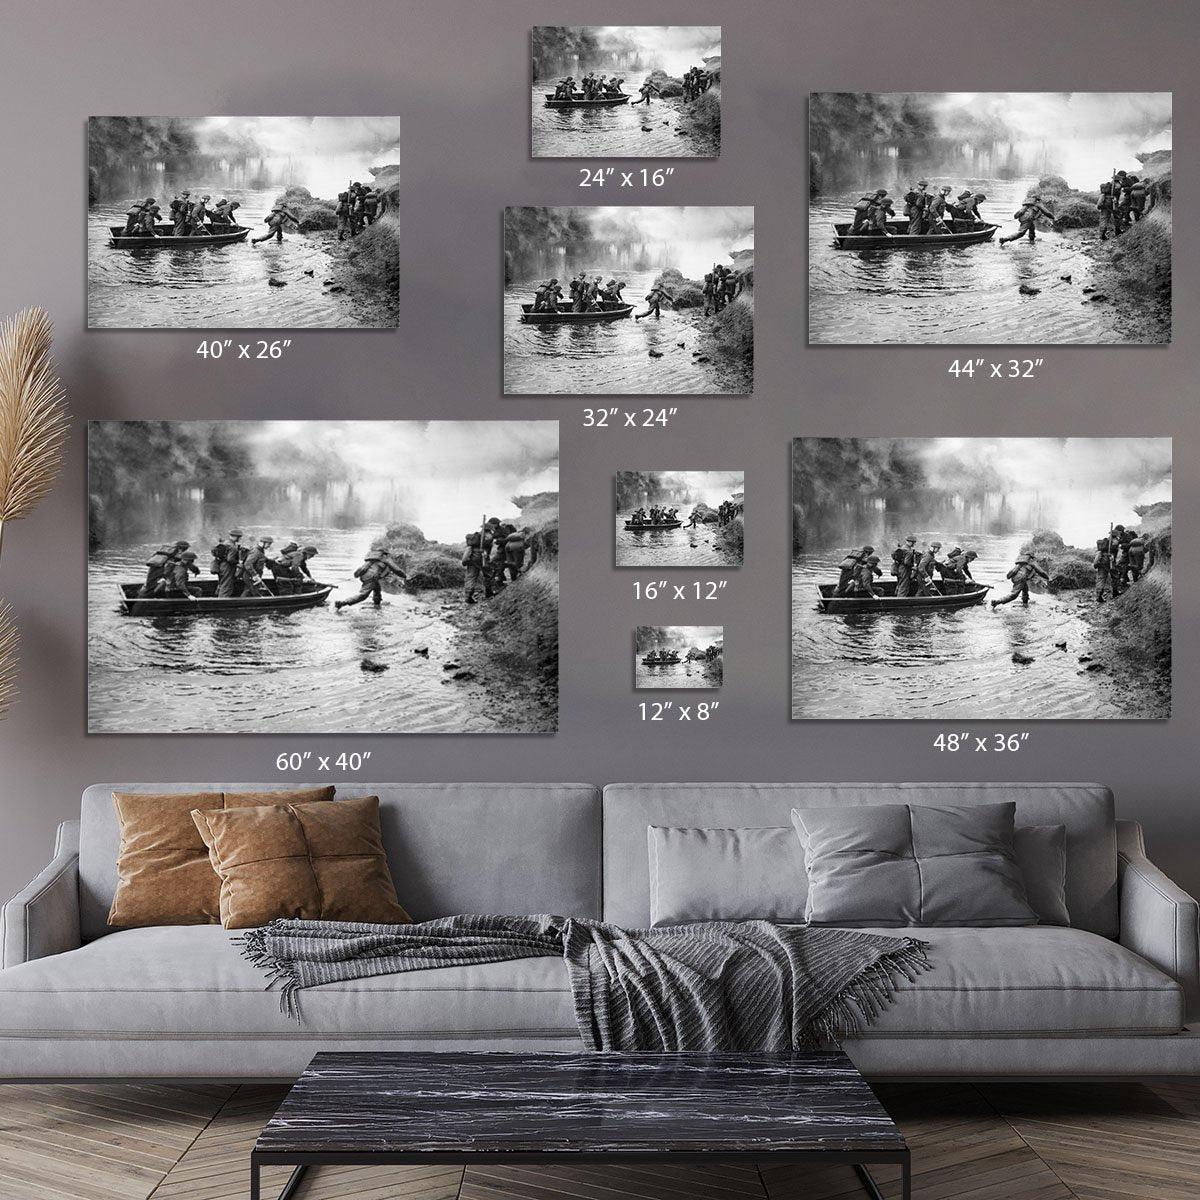 British troops training Canvas Print or Poster